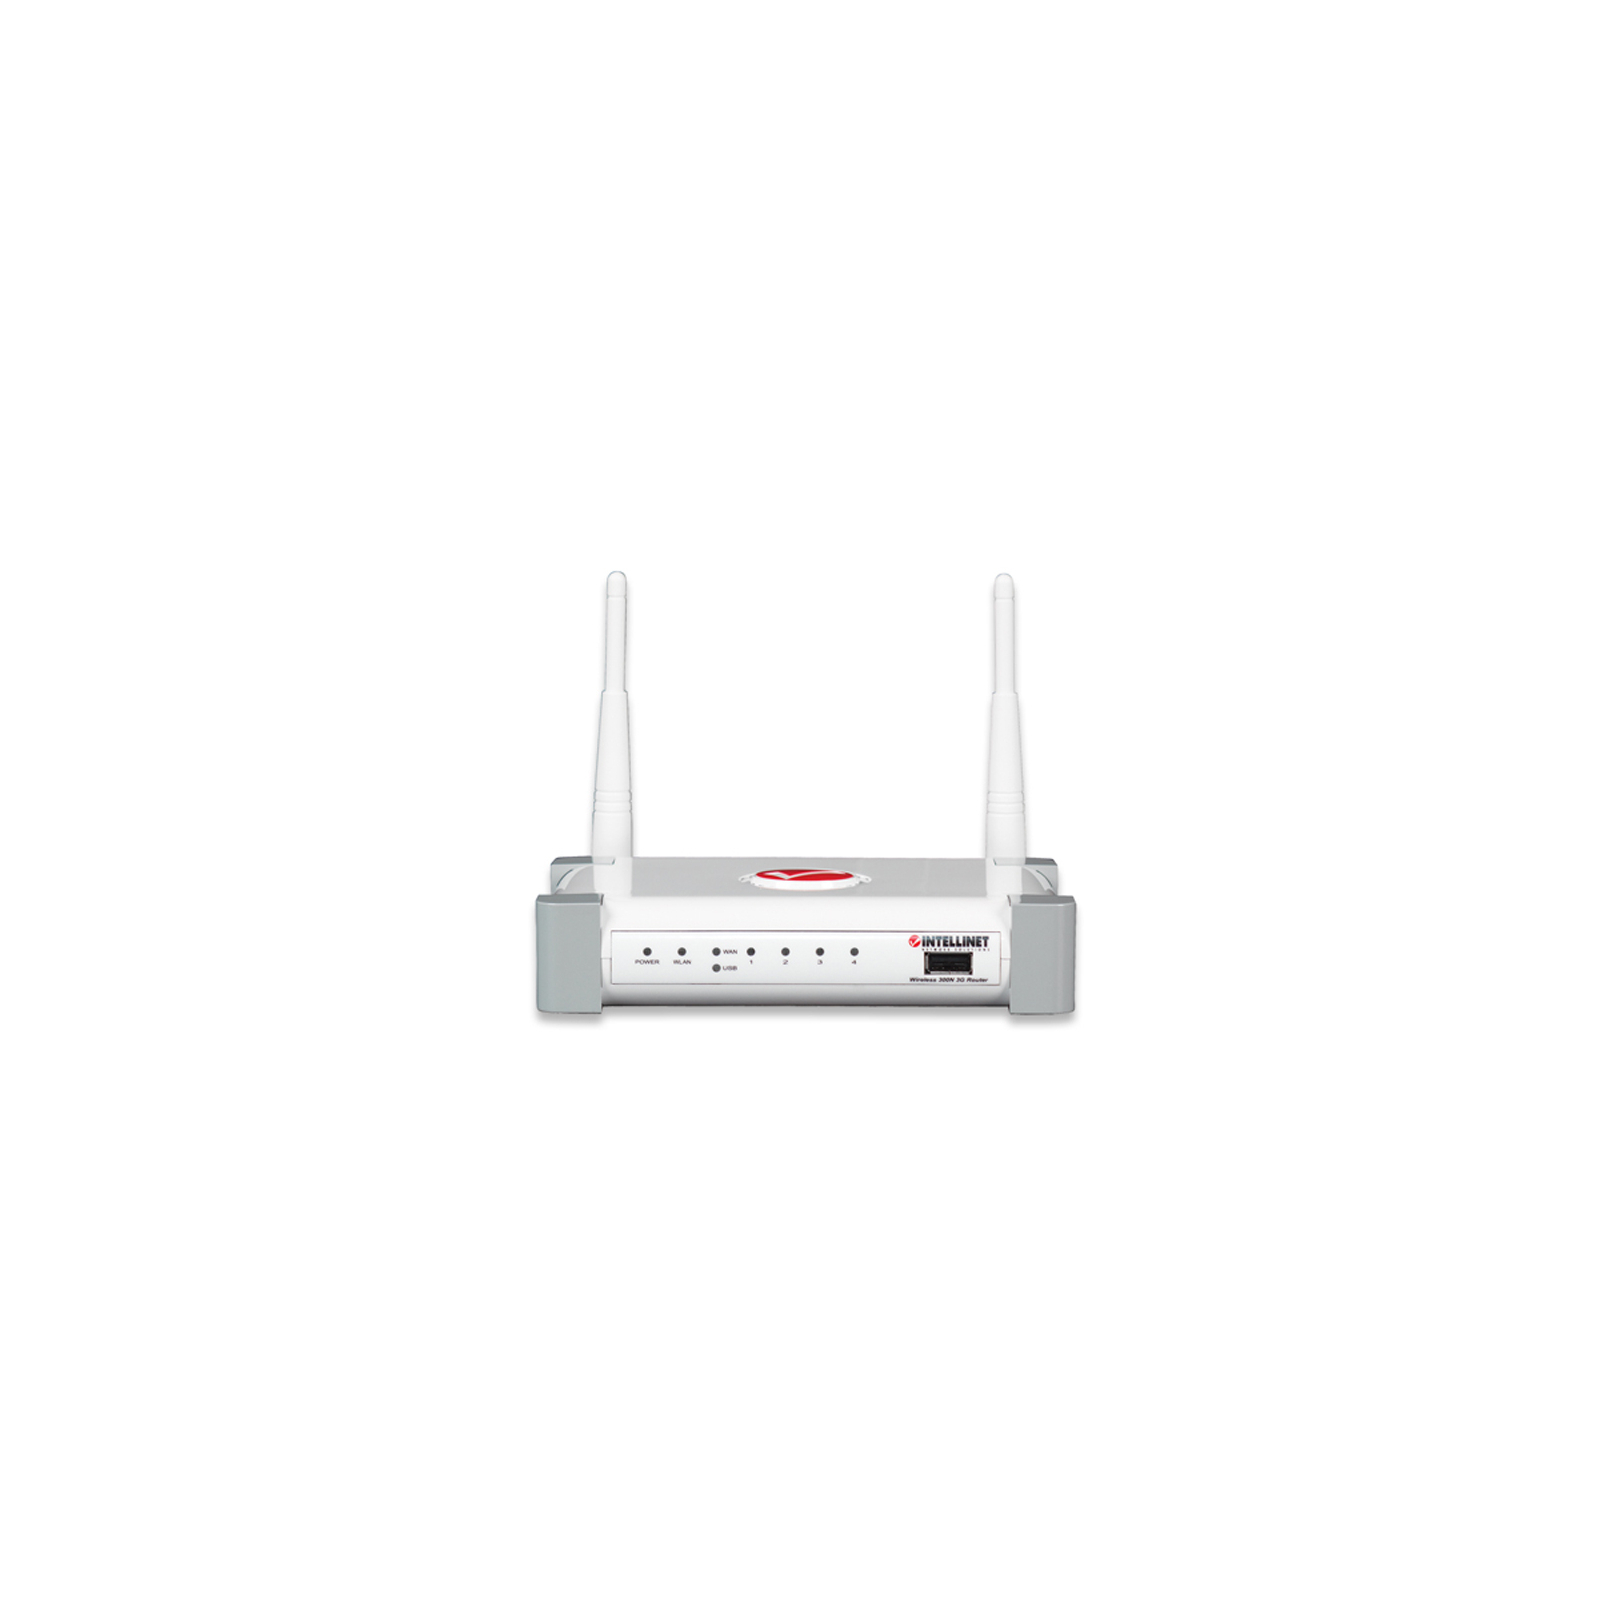 Маршрутизатор Intellinet 3G 4-Port Router MIMO 2T2R изображение 2